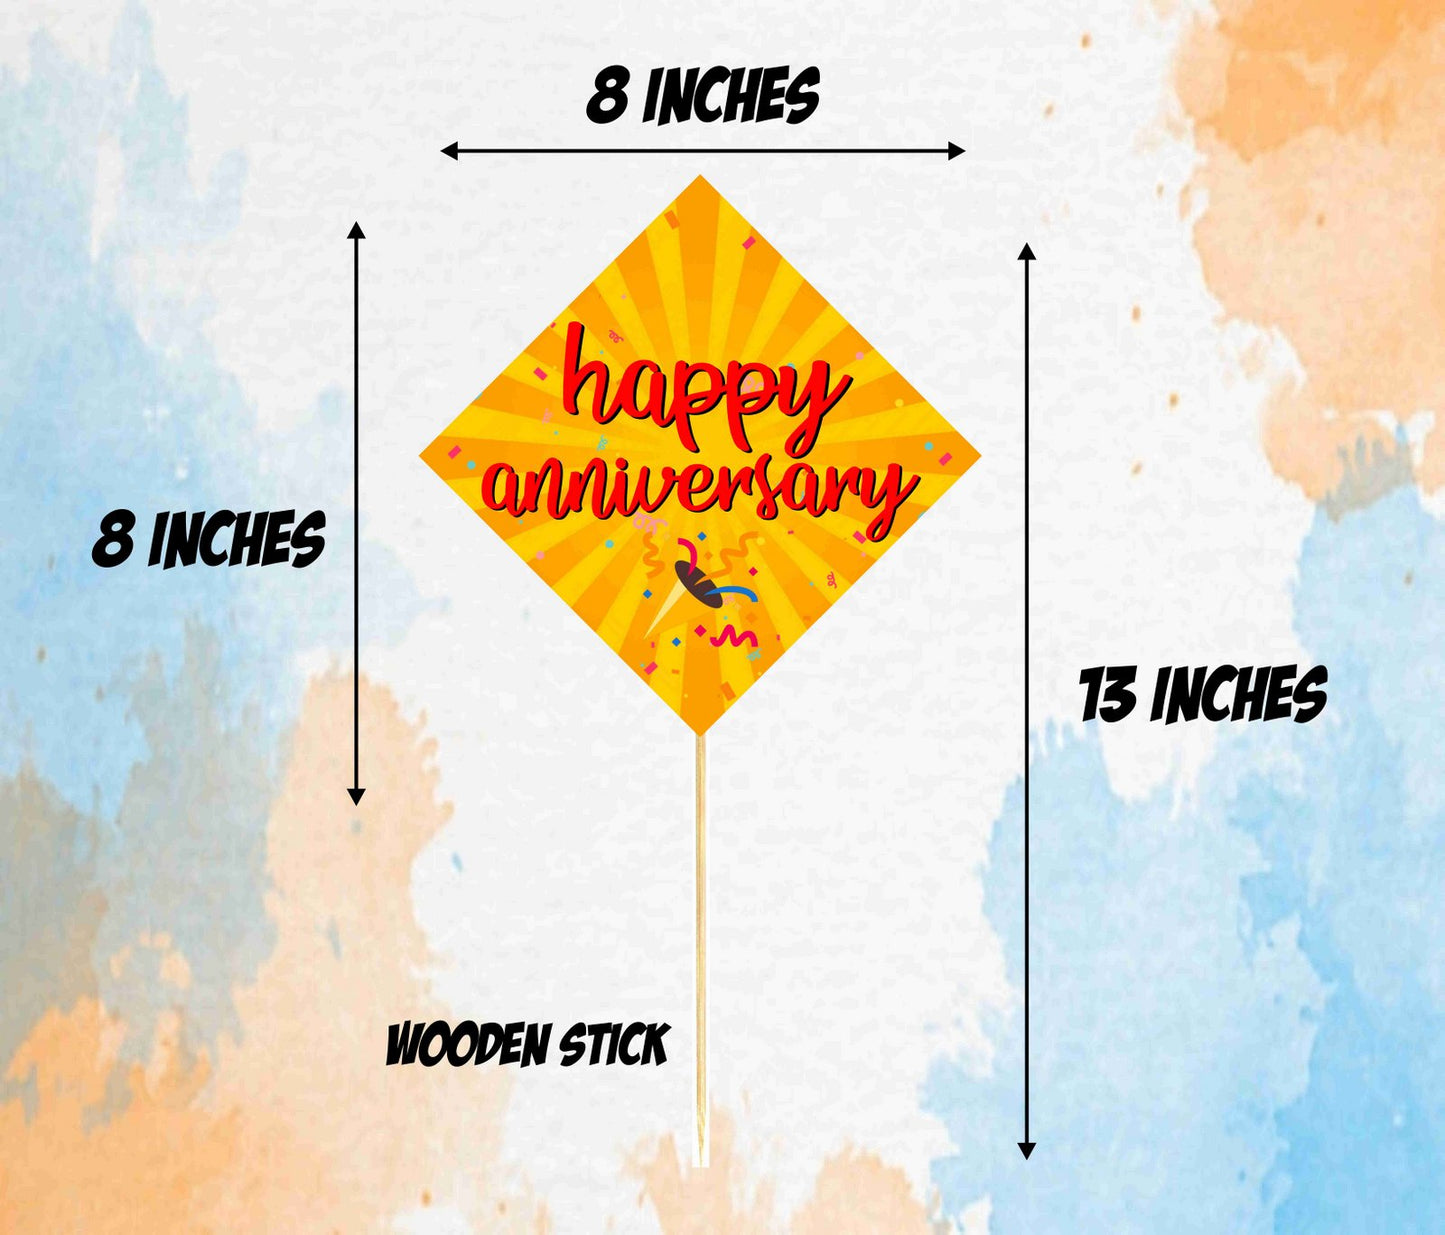 Happy Anniversary Theme Props Banner Swirls for Anniversary Decoration Backdrop Photo Shoot, Photo Booth Party Item for Adults and Kids